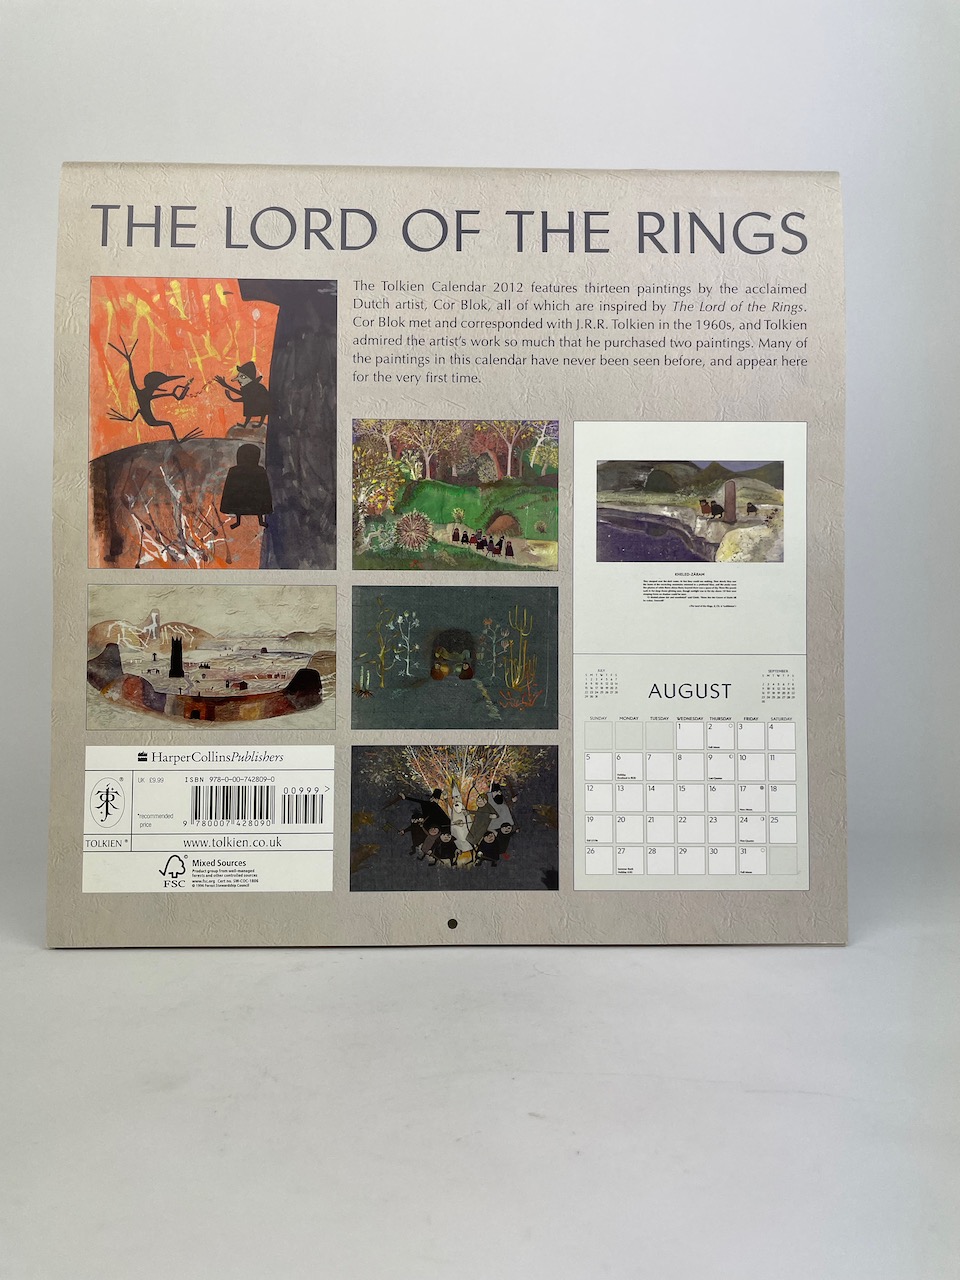 Tolkien Calendar 2012 features 13 paintings by the artist Cor Blok 2